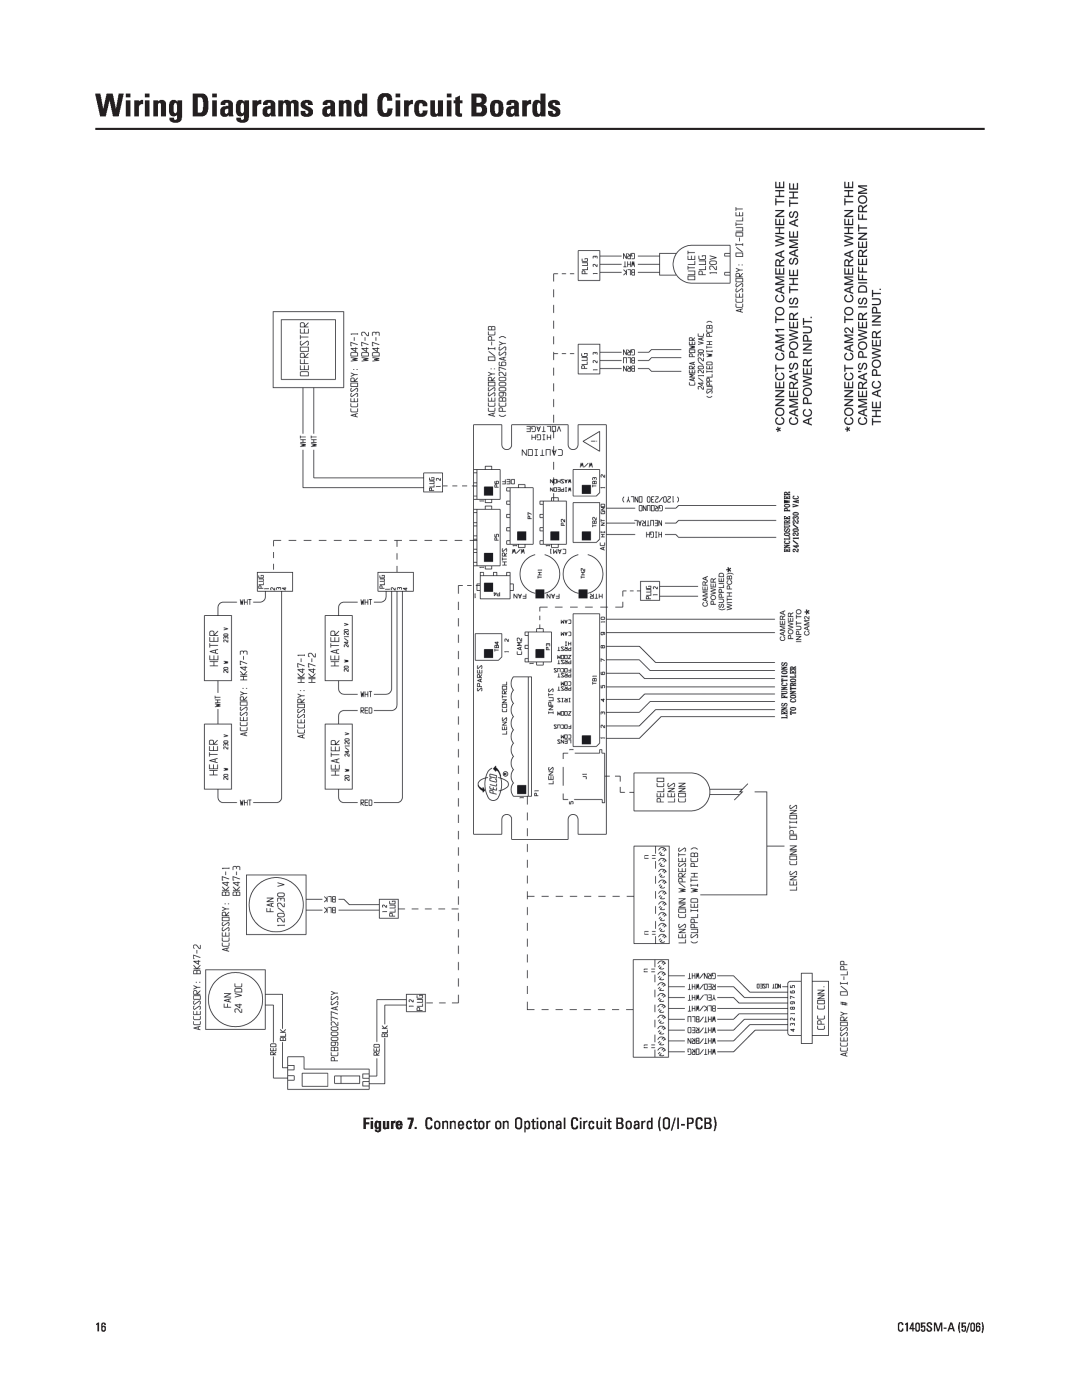 Pelco EH4700 Series manual Wiring Diagrams and Circuit Boards, C1405SM-A5/06 